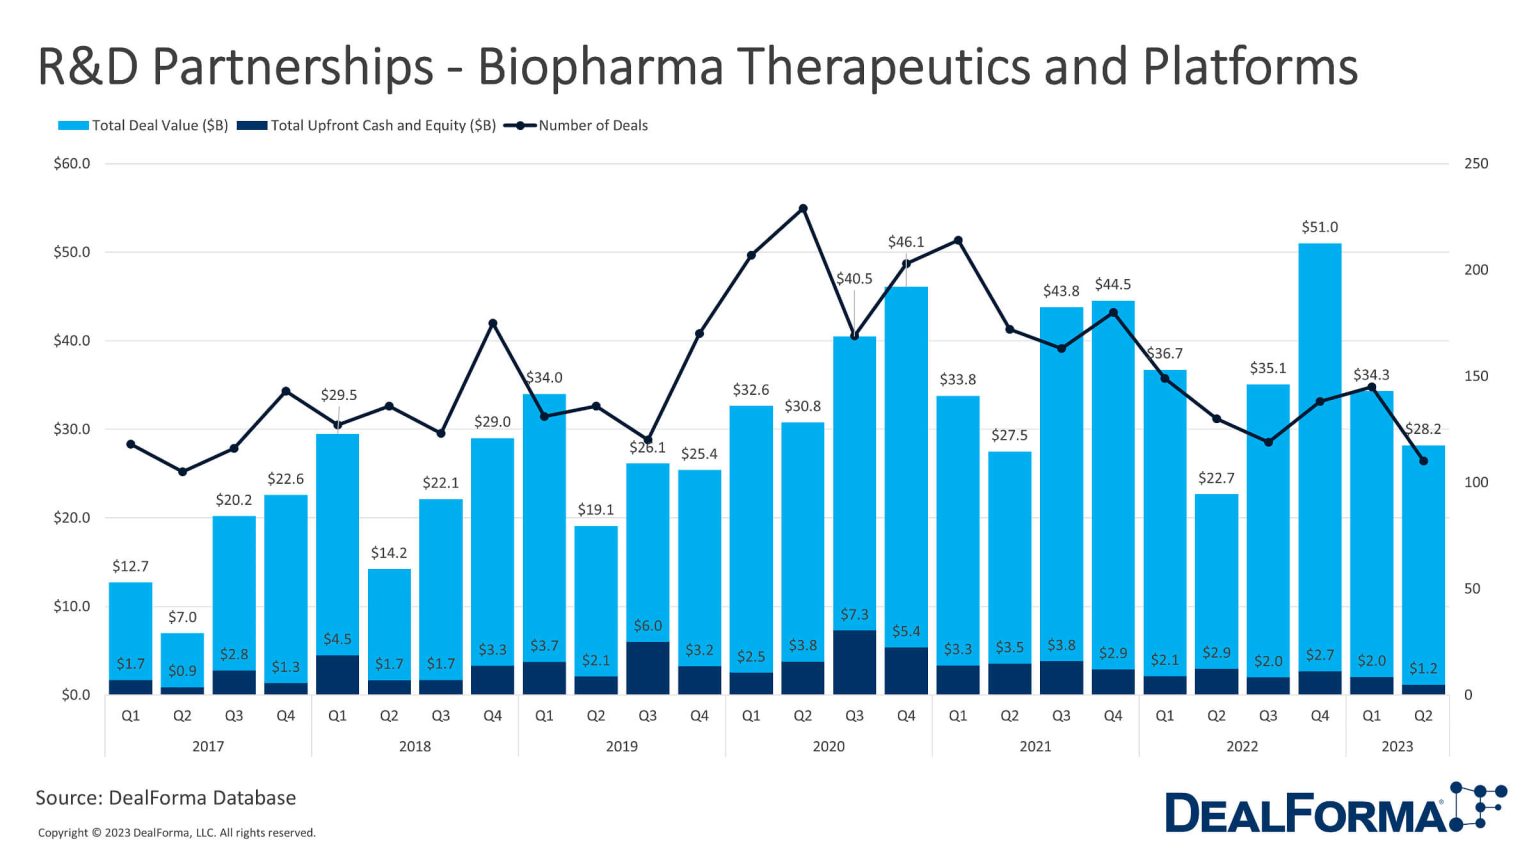 RD Partnerships In Biopharma Therapeutics And Platforms